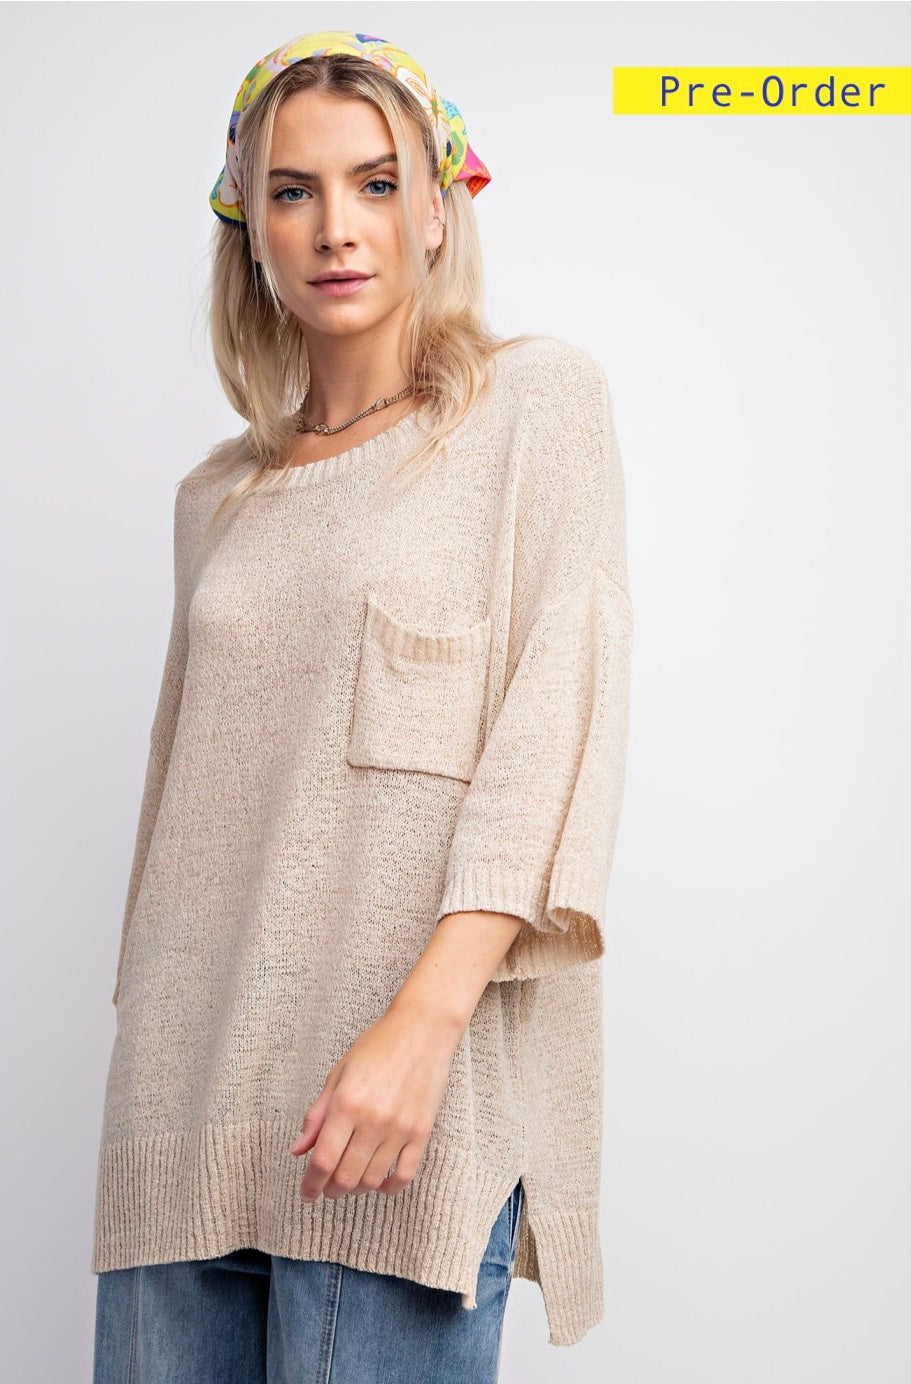 Slouchy Silhouette Sweater